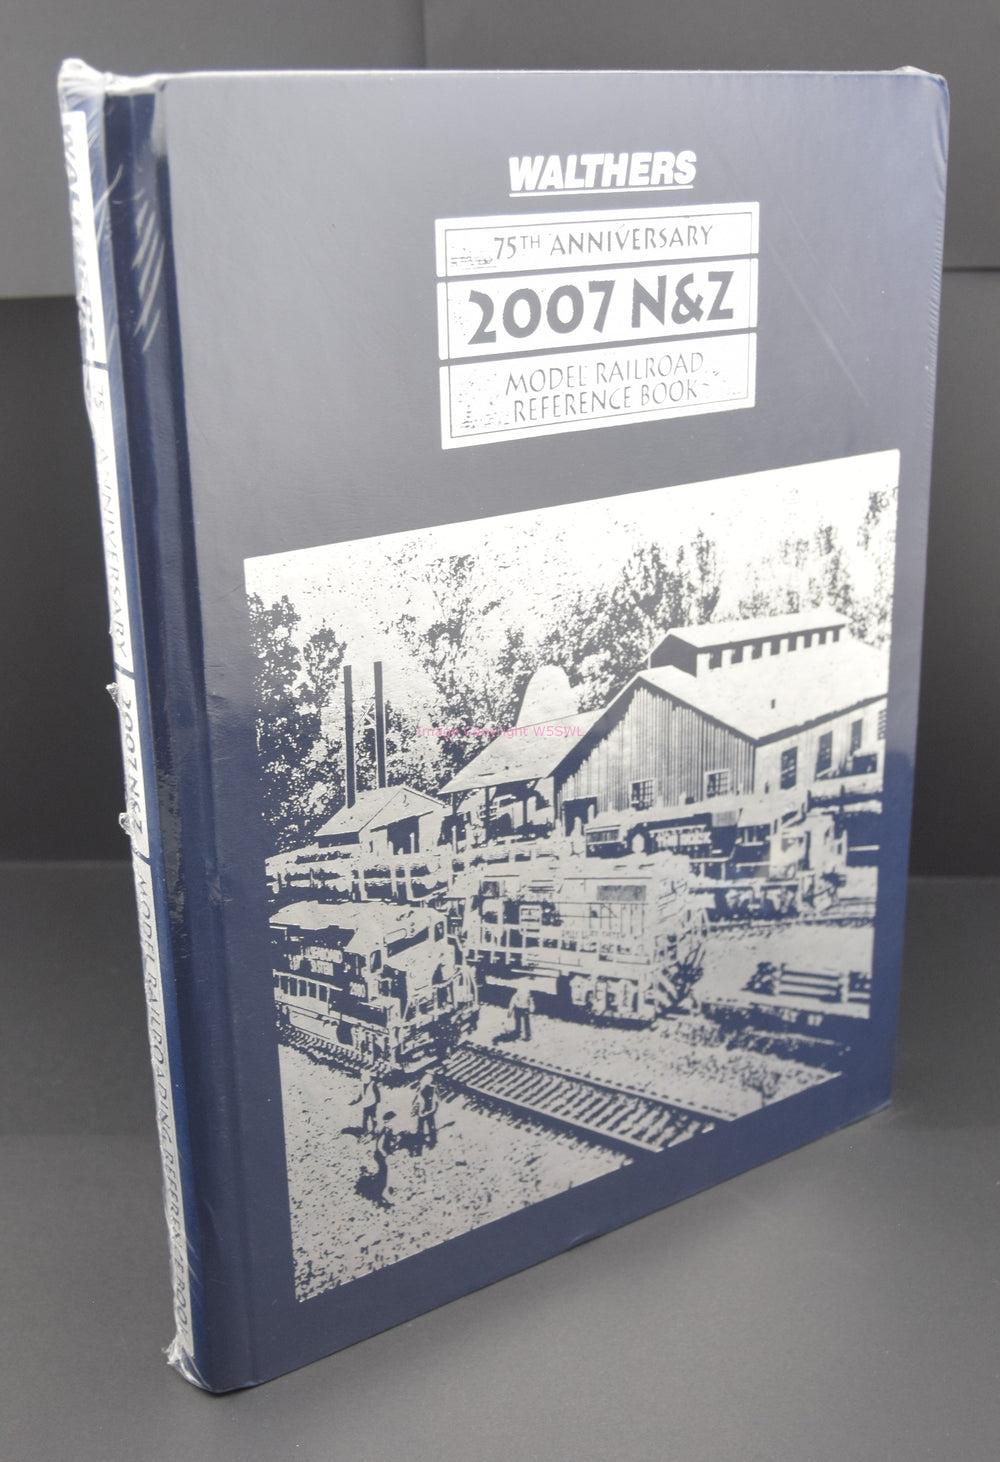 Walthers Hardbound 75th Anniversary 2007 N & Z Model Railroad Reference Book - Dave's Hobby Shop by W5SWL